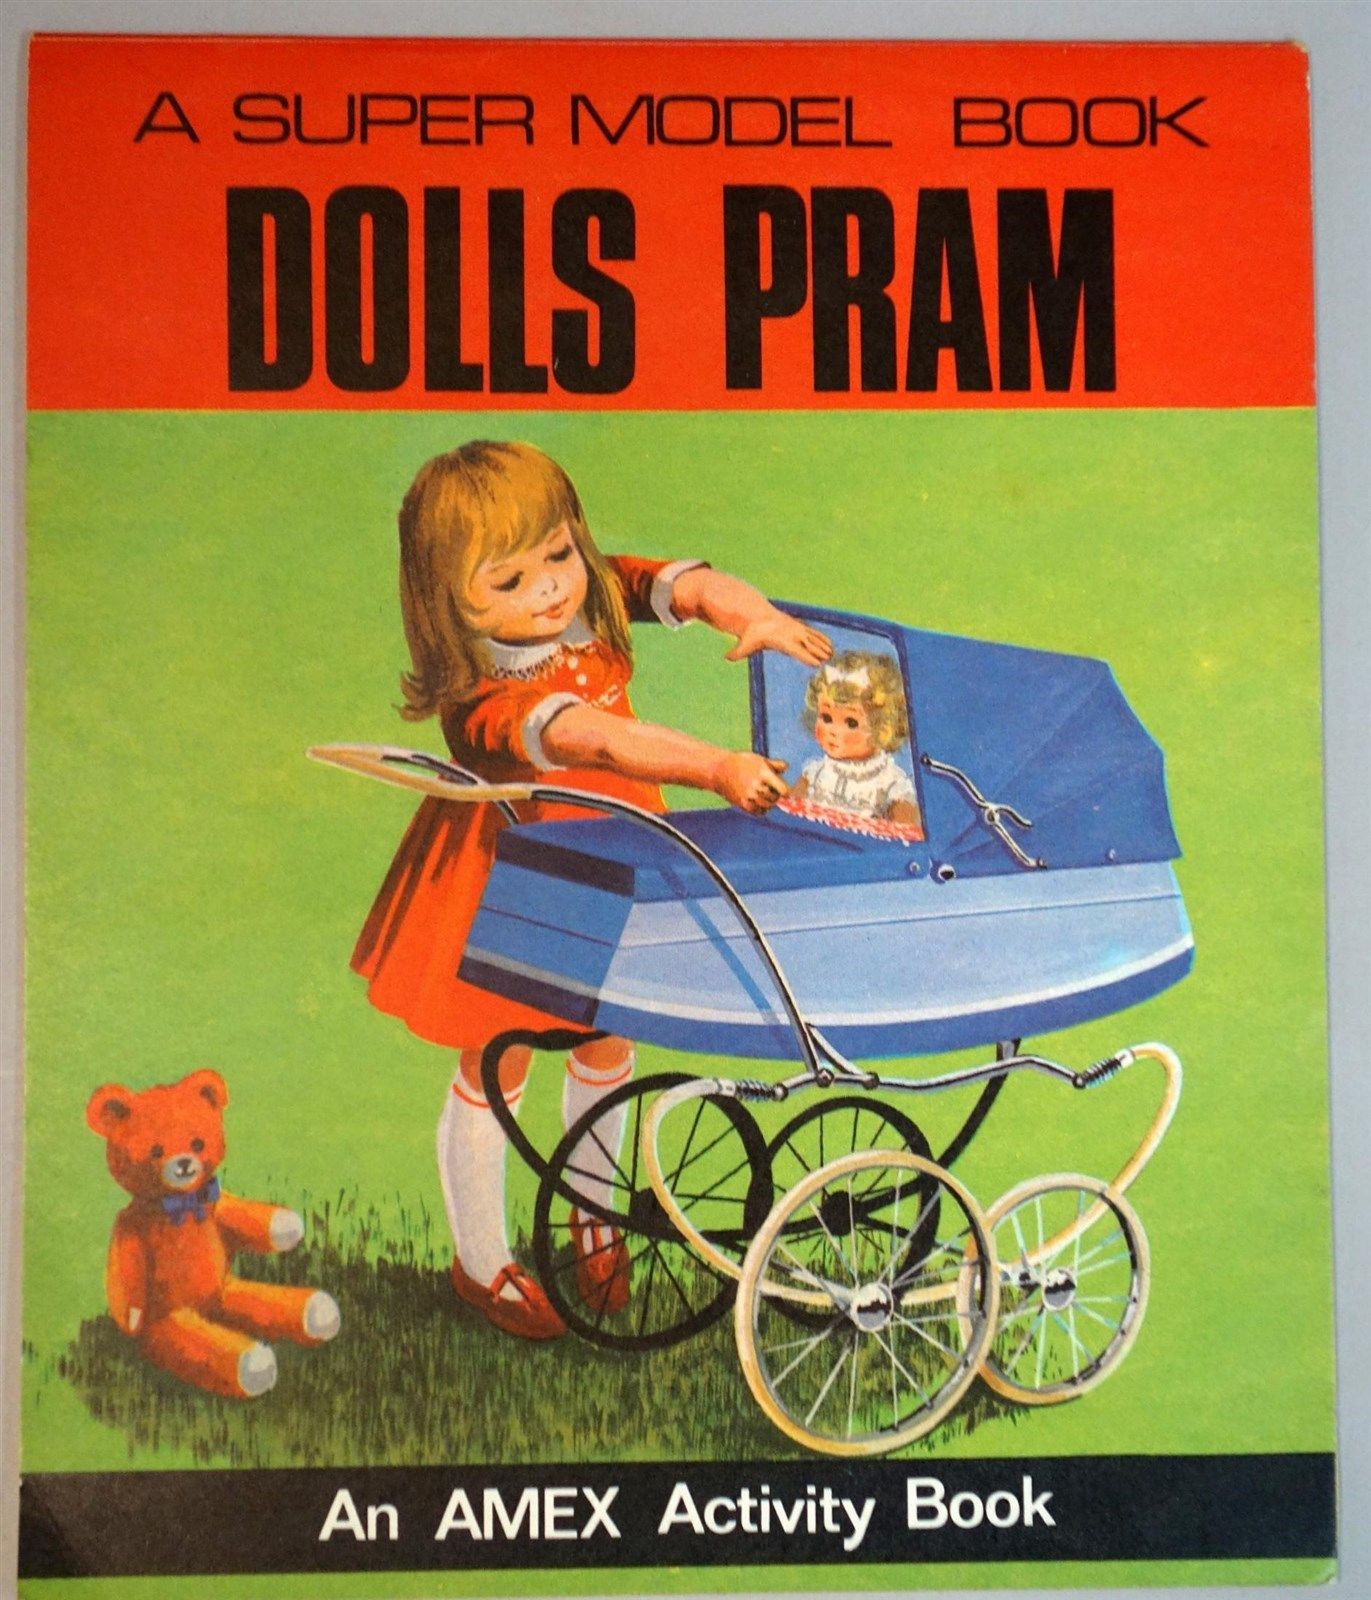 Uncut A Super Model Book Dolls Pram to Assemble with Story in Book 1969